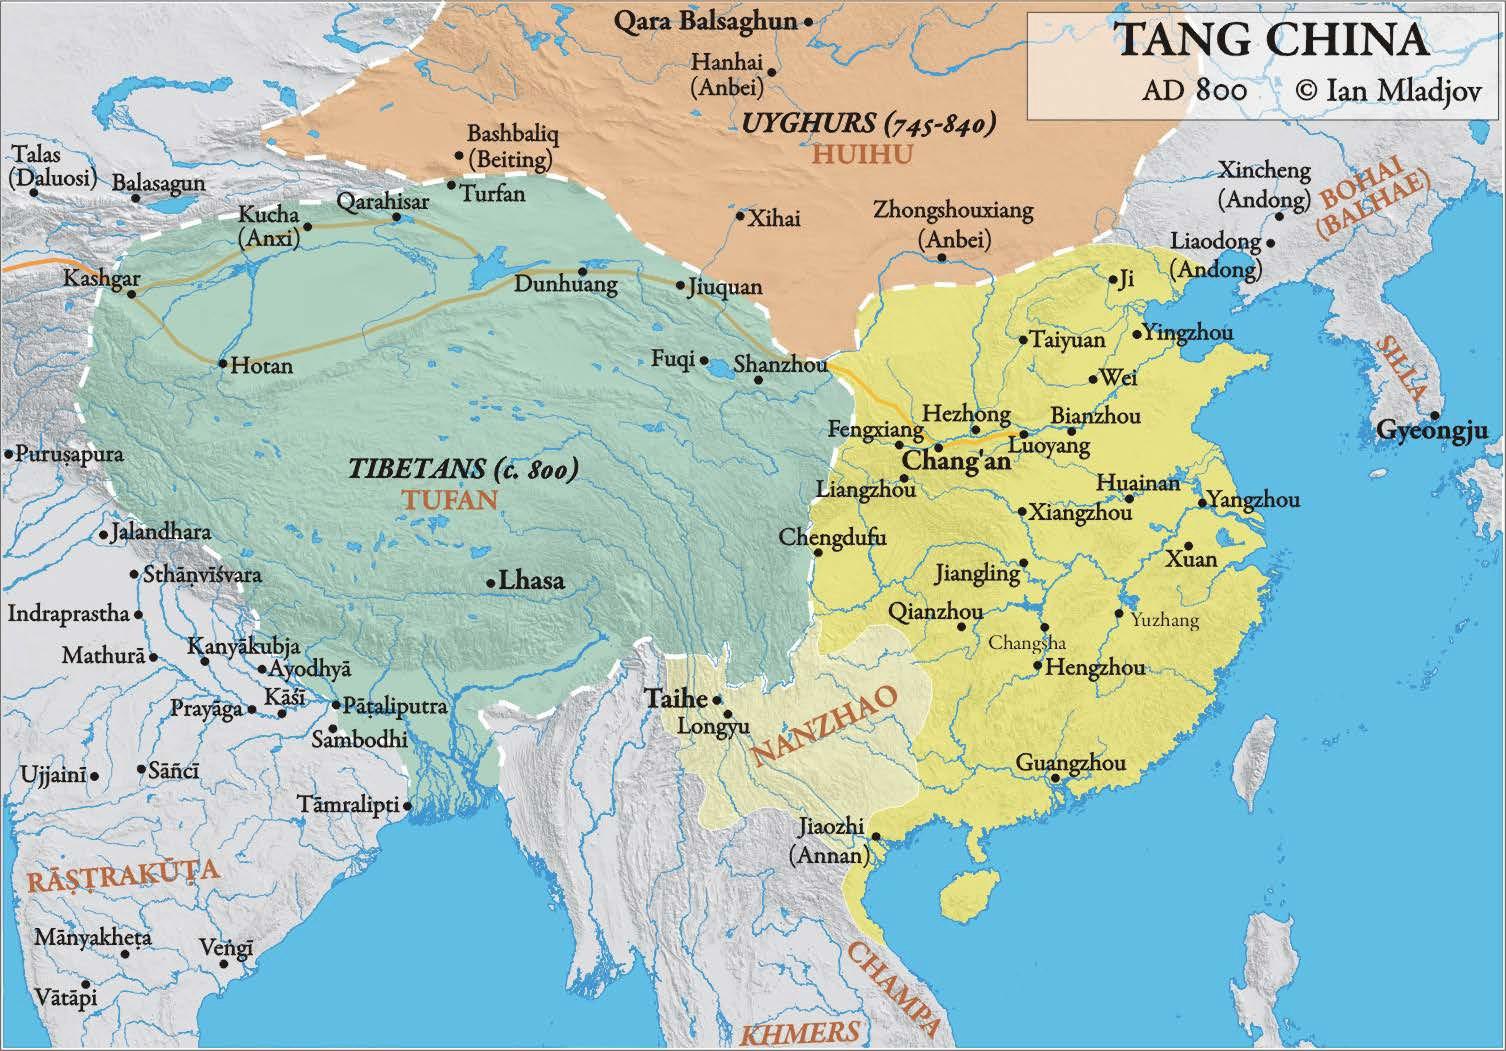 Map of The Tang Dynasty in 800 CE